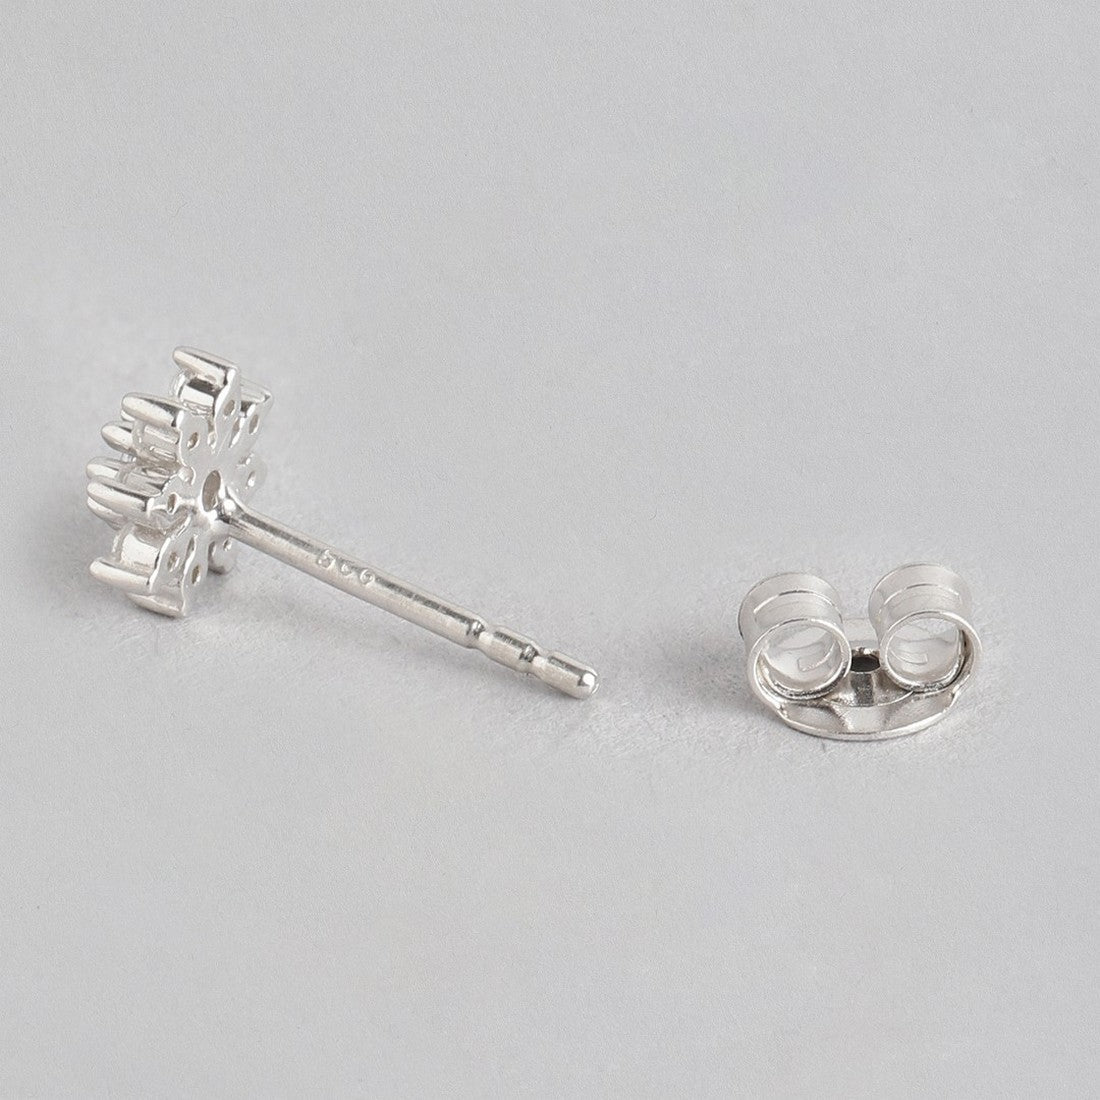 Blooming Romance 925 Silver Earring Combo - Valentines Edition With Gift Box